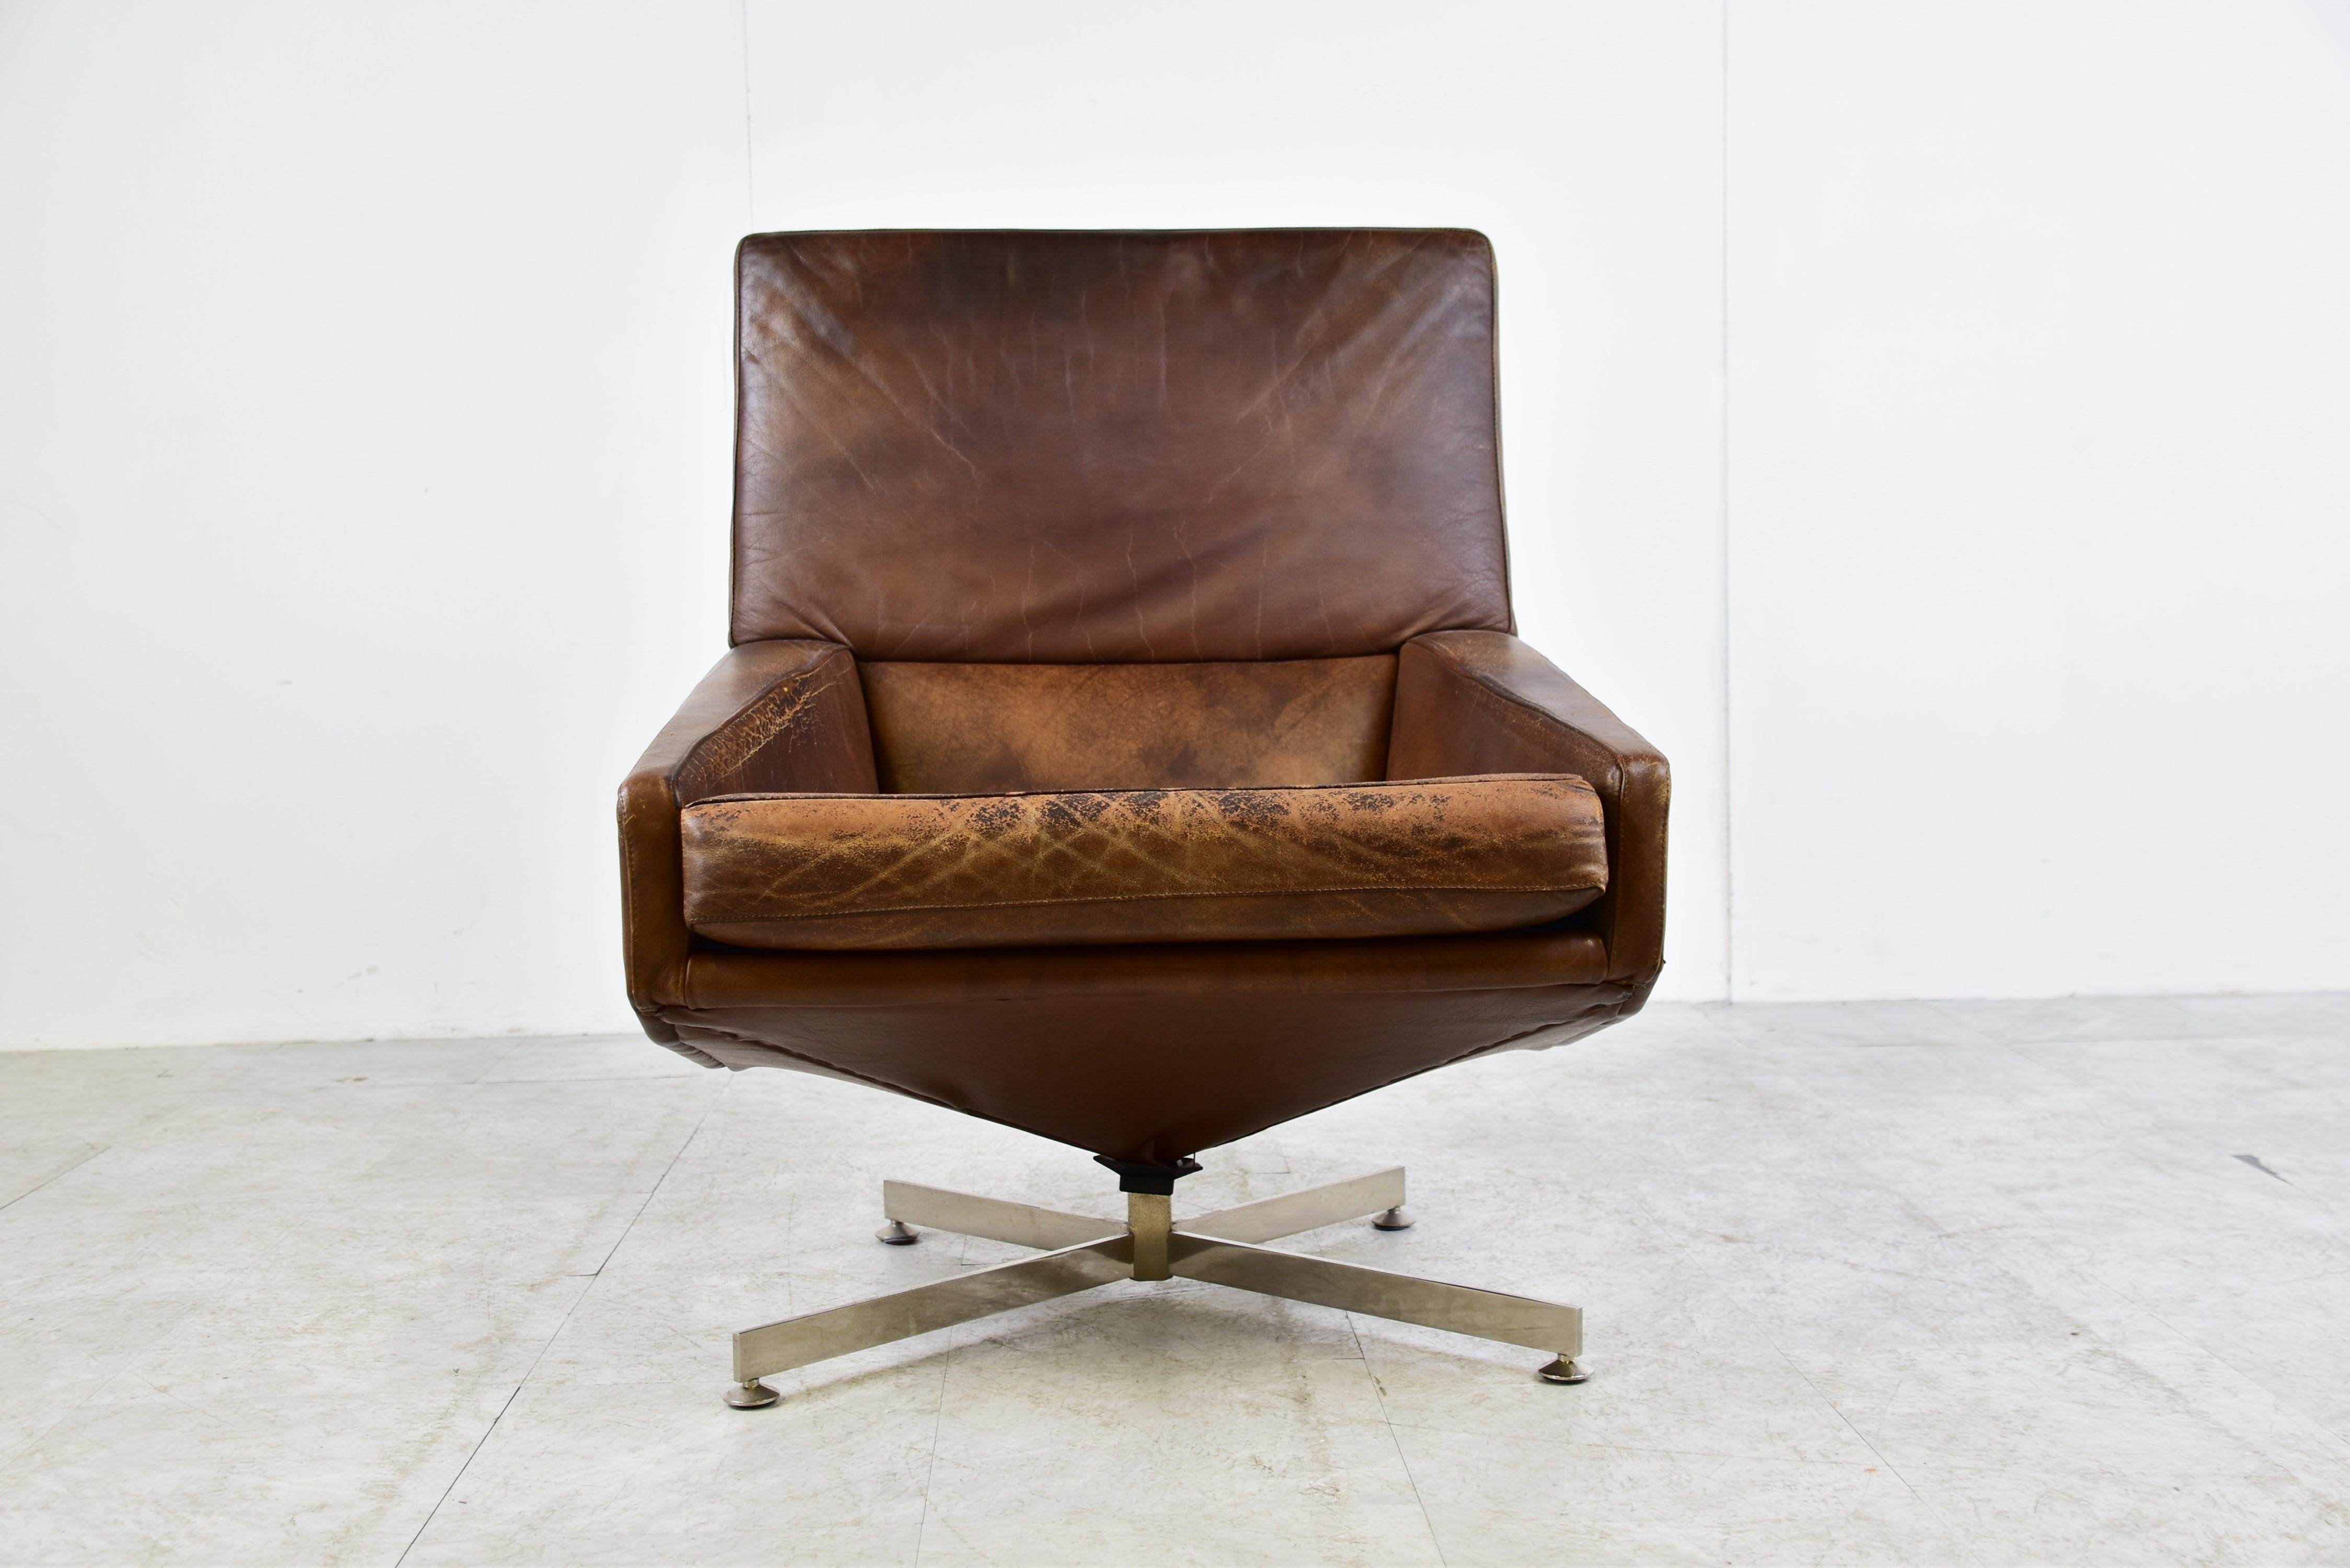 Belgian Vintage Leather Swivel Chair by Beaufort, 1960s